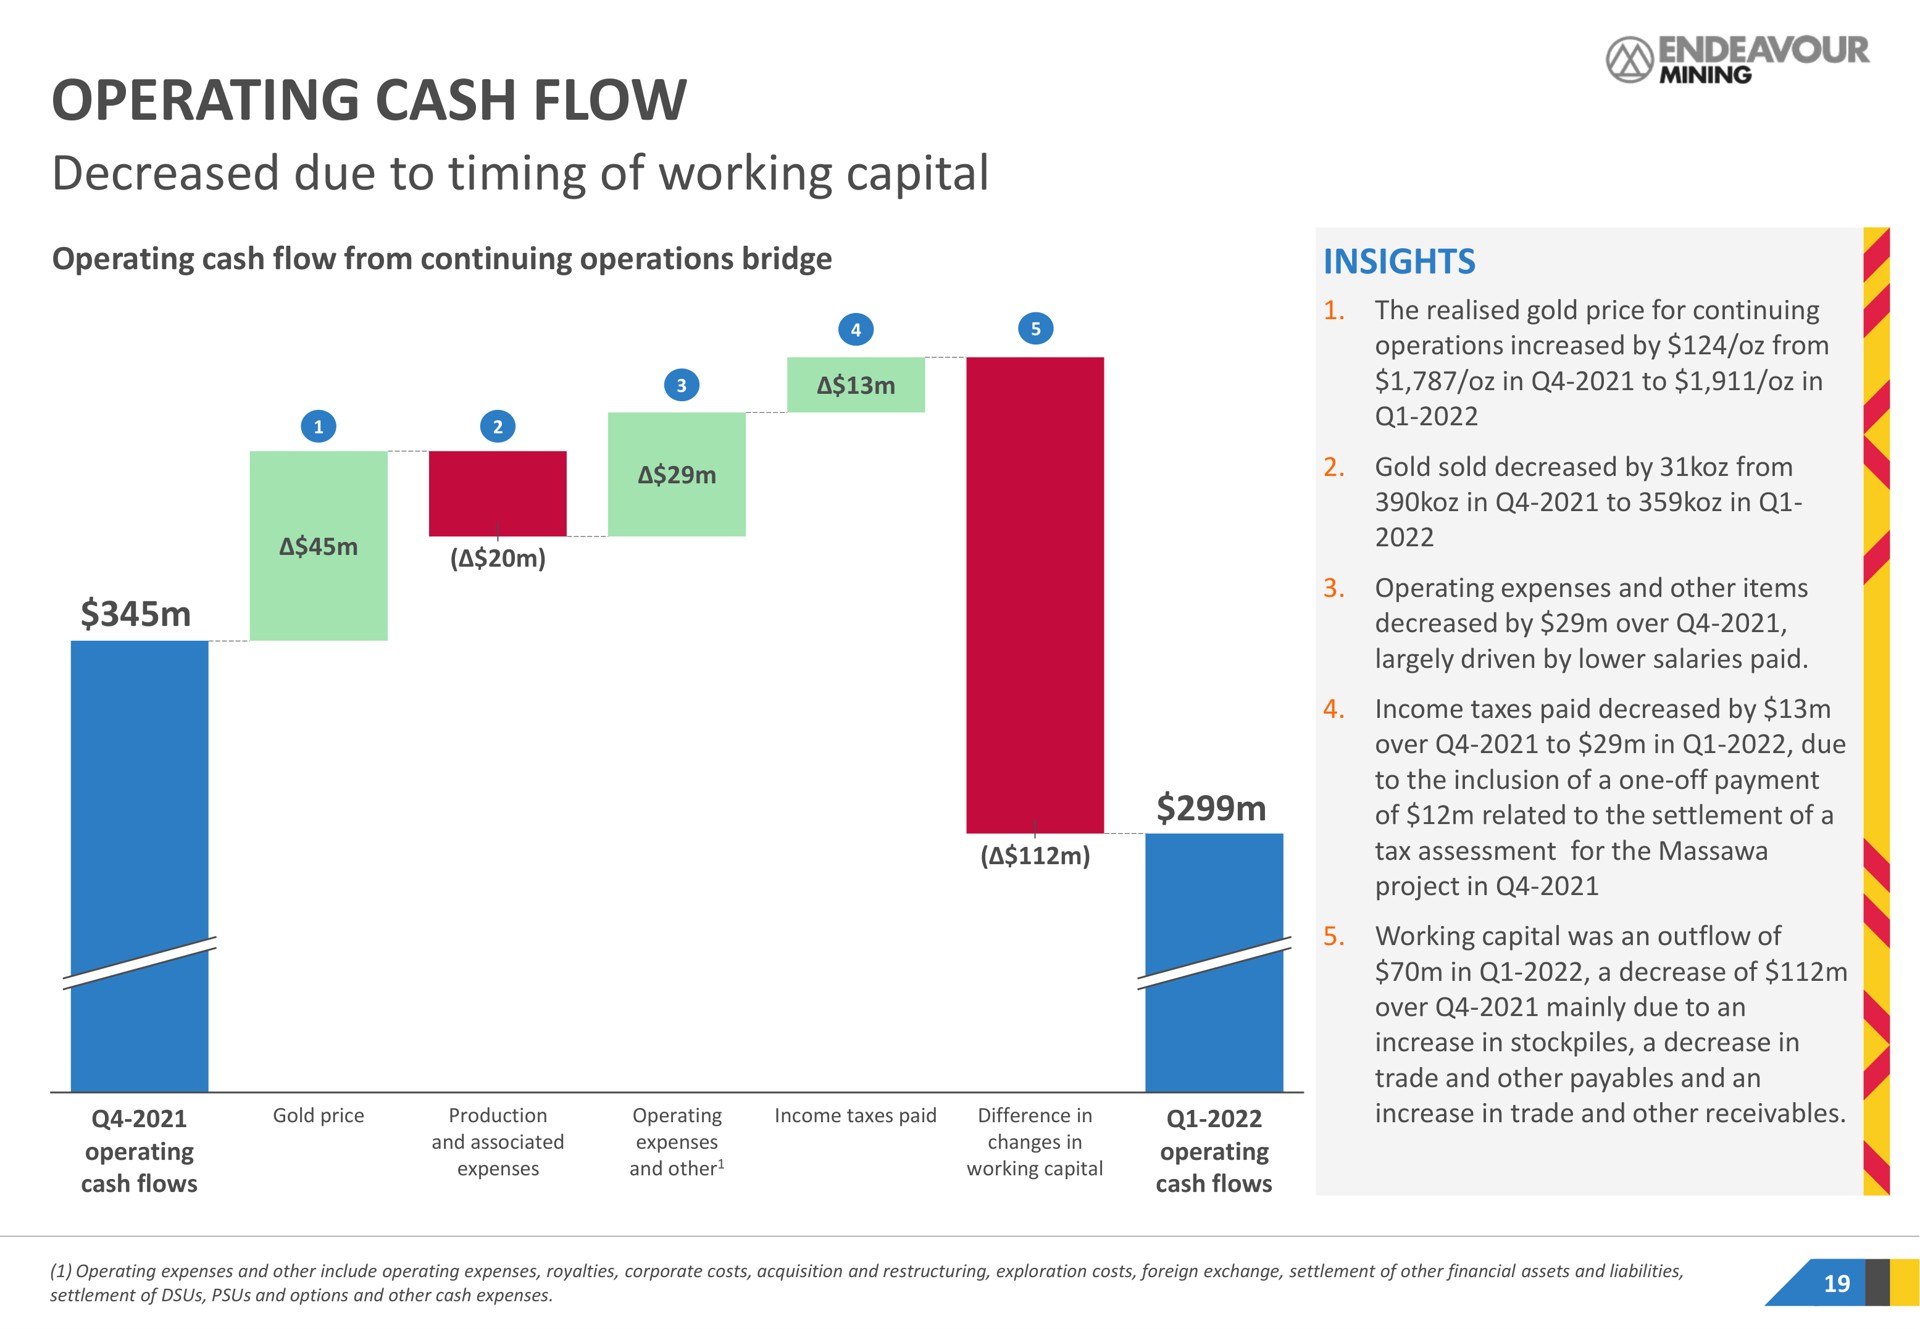 operating cash flow decreased due to timing of working capital | Endeavour Mining